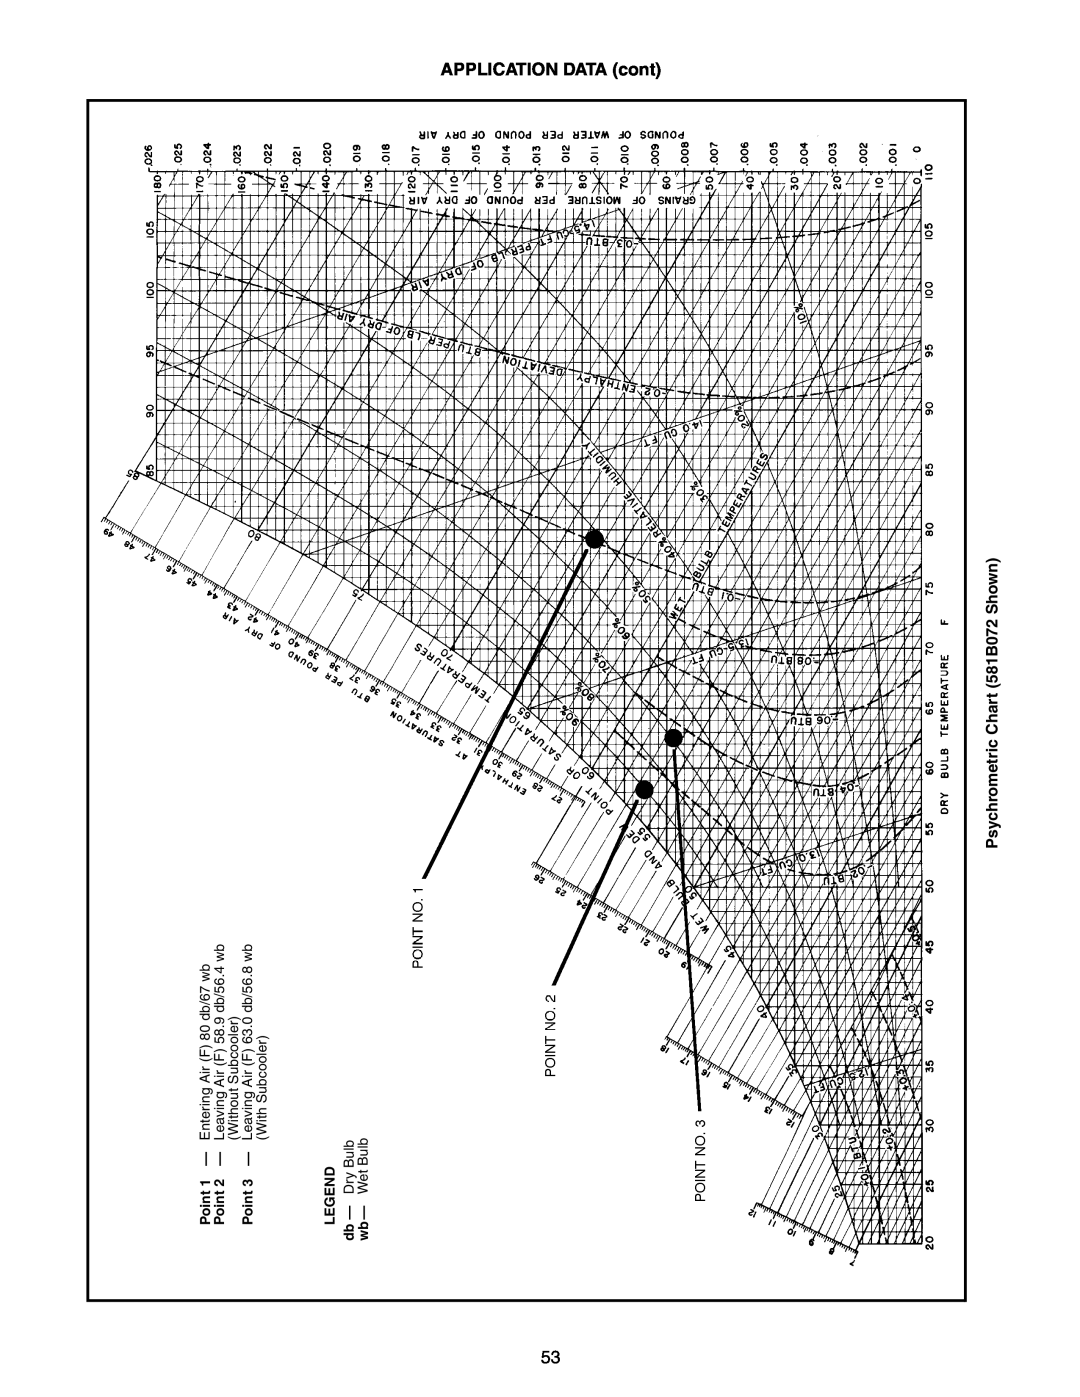 Bryant APPLICATION DATA cont, Psychrometric Chart 581B072 Shown, Point, Entering Air F 80 db/67 wb, Without Subcooler 